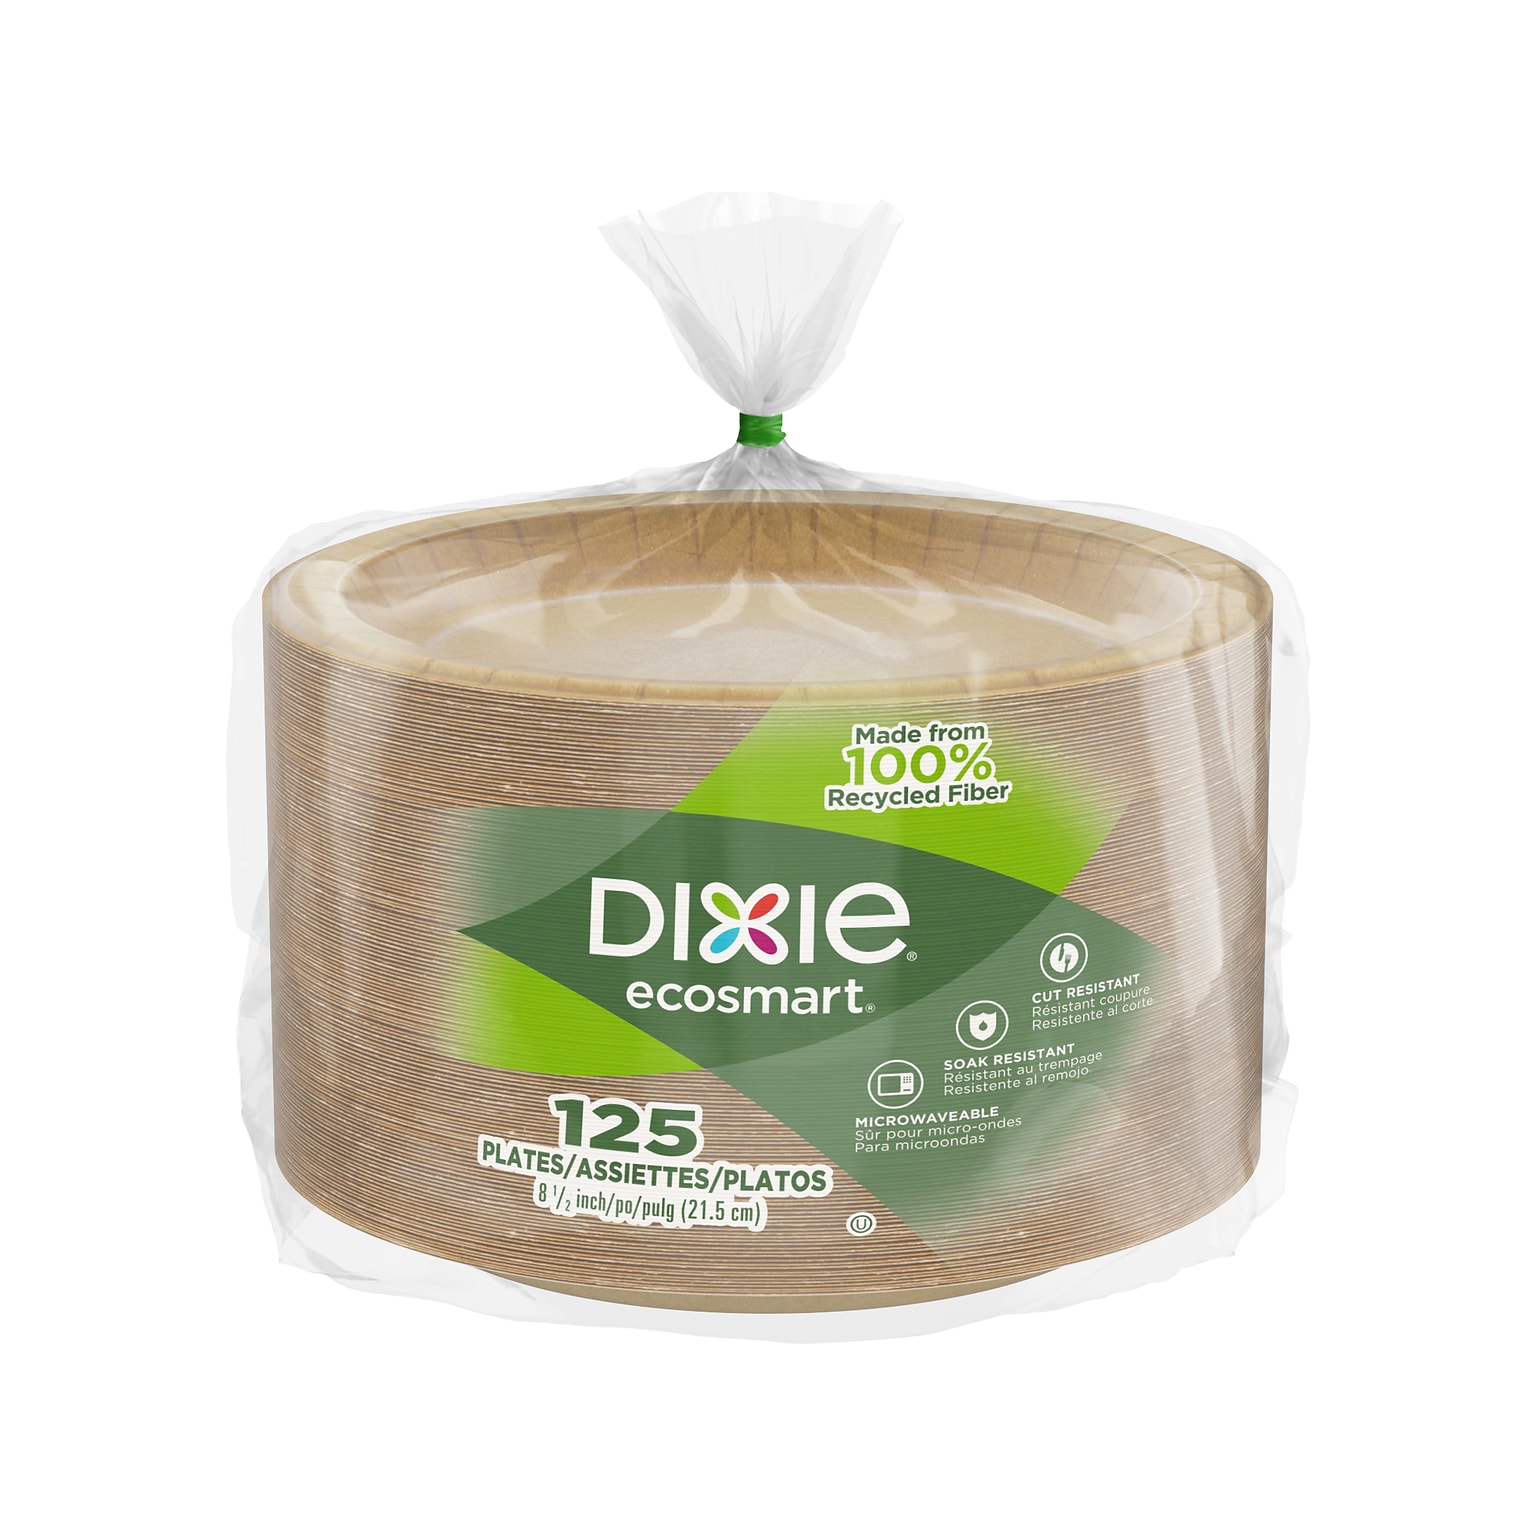 Dixie ecosmart 8.5Dia. Paper Plate, Brown, 125 Plates/Pack (RFP9WS)